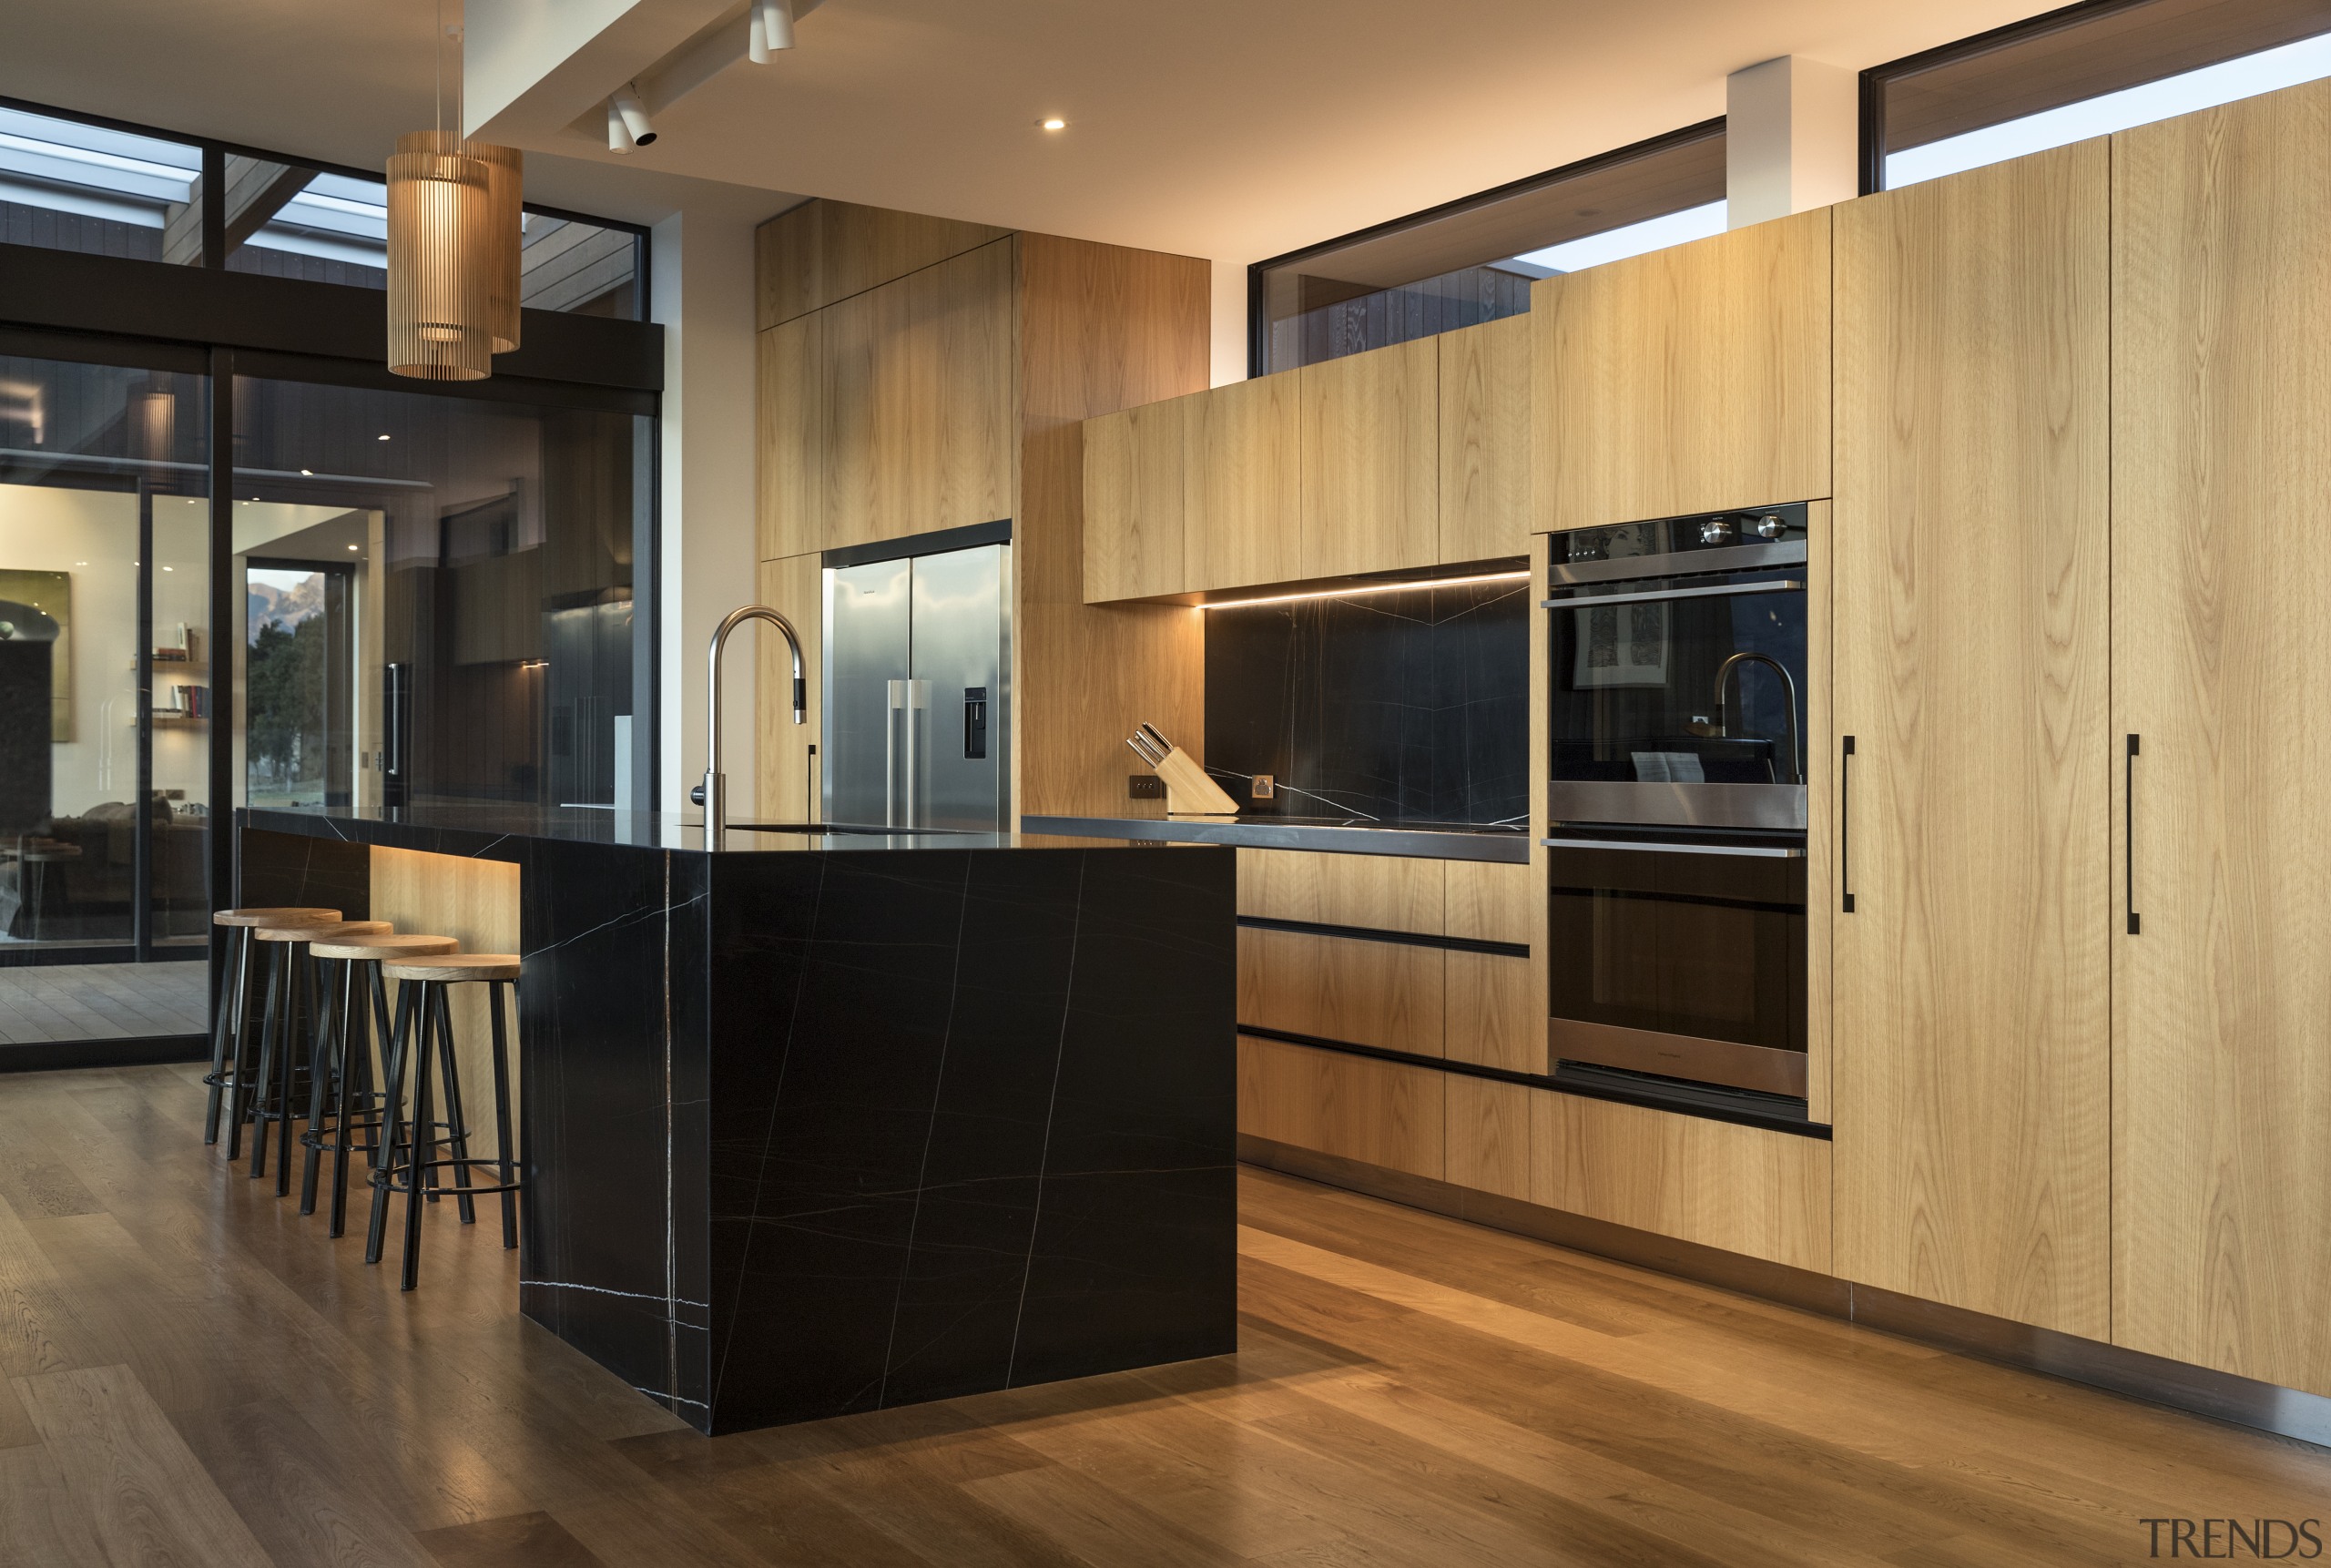 ​​​​​​​Recessed track spots above this benchtop provide a architecture, kitchen, cabinetry, countertop, cupboard, timber flooring, home, house, interior design, kitchen, wood flooring, wood stain, brown, black, lighting, feature lighting, fisher & Paykel, Eliska Lewis Architects